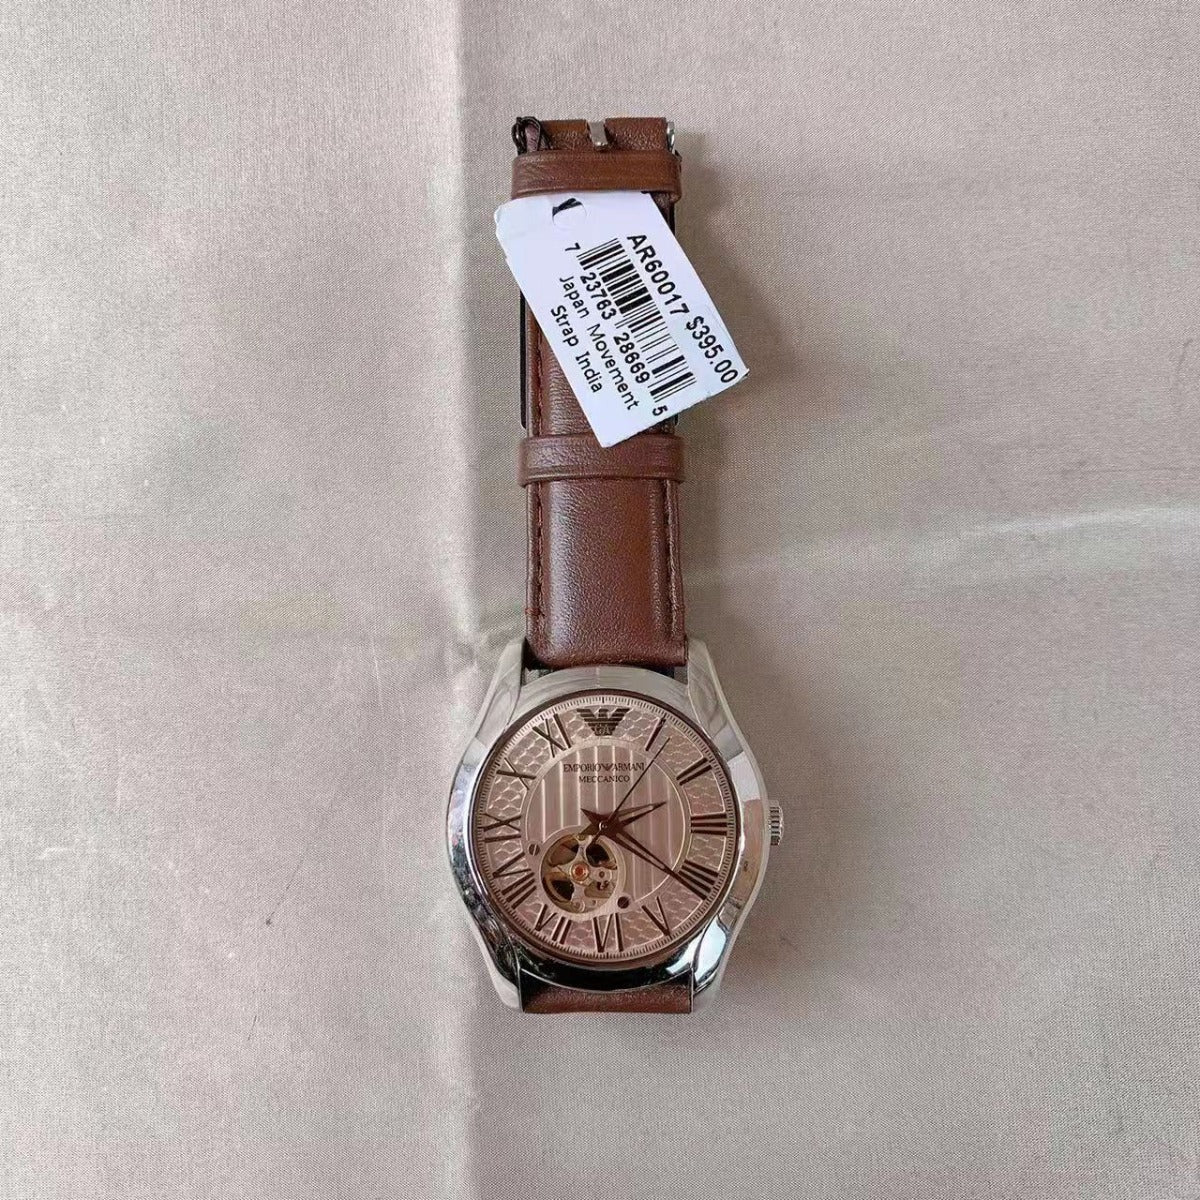 Emporio Armani AR60017 Automatic Brown Leather Watch 723763286695